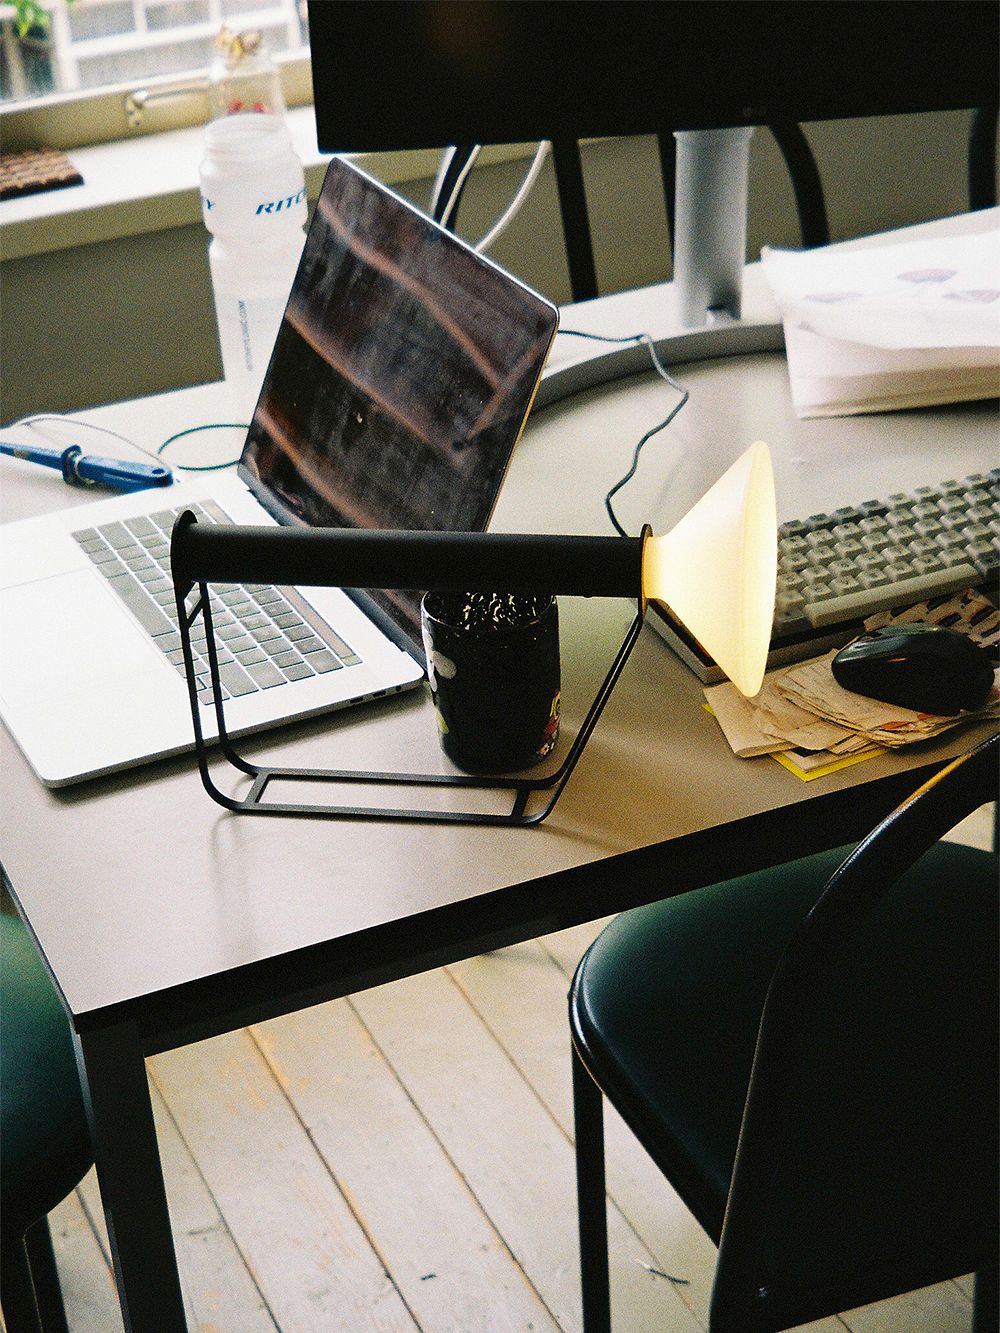 An image of a black Piton lamp as part of the home office decor.